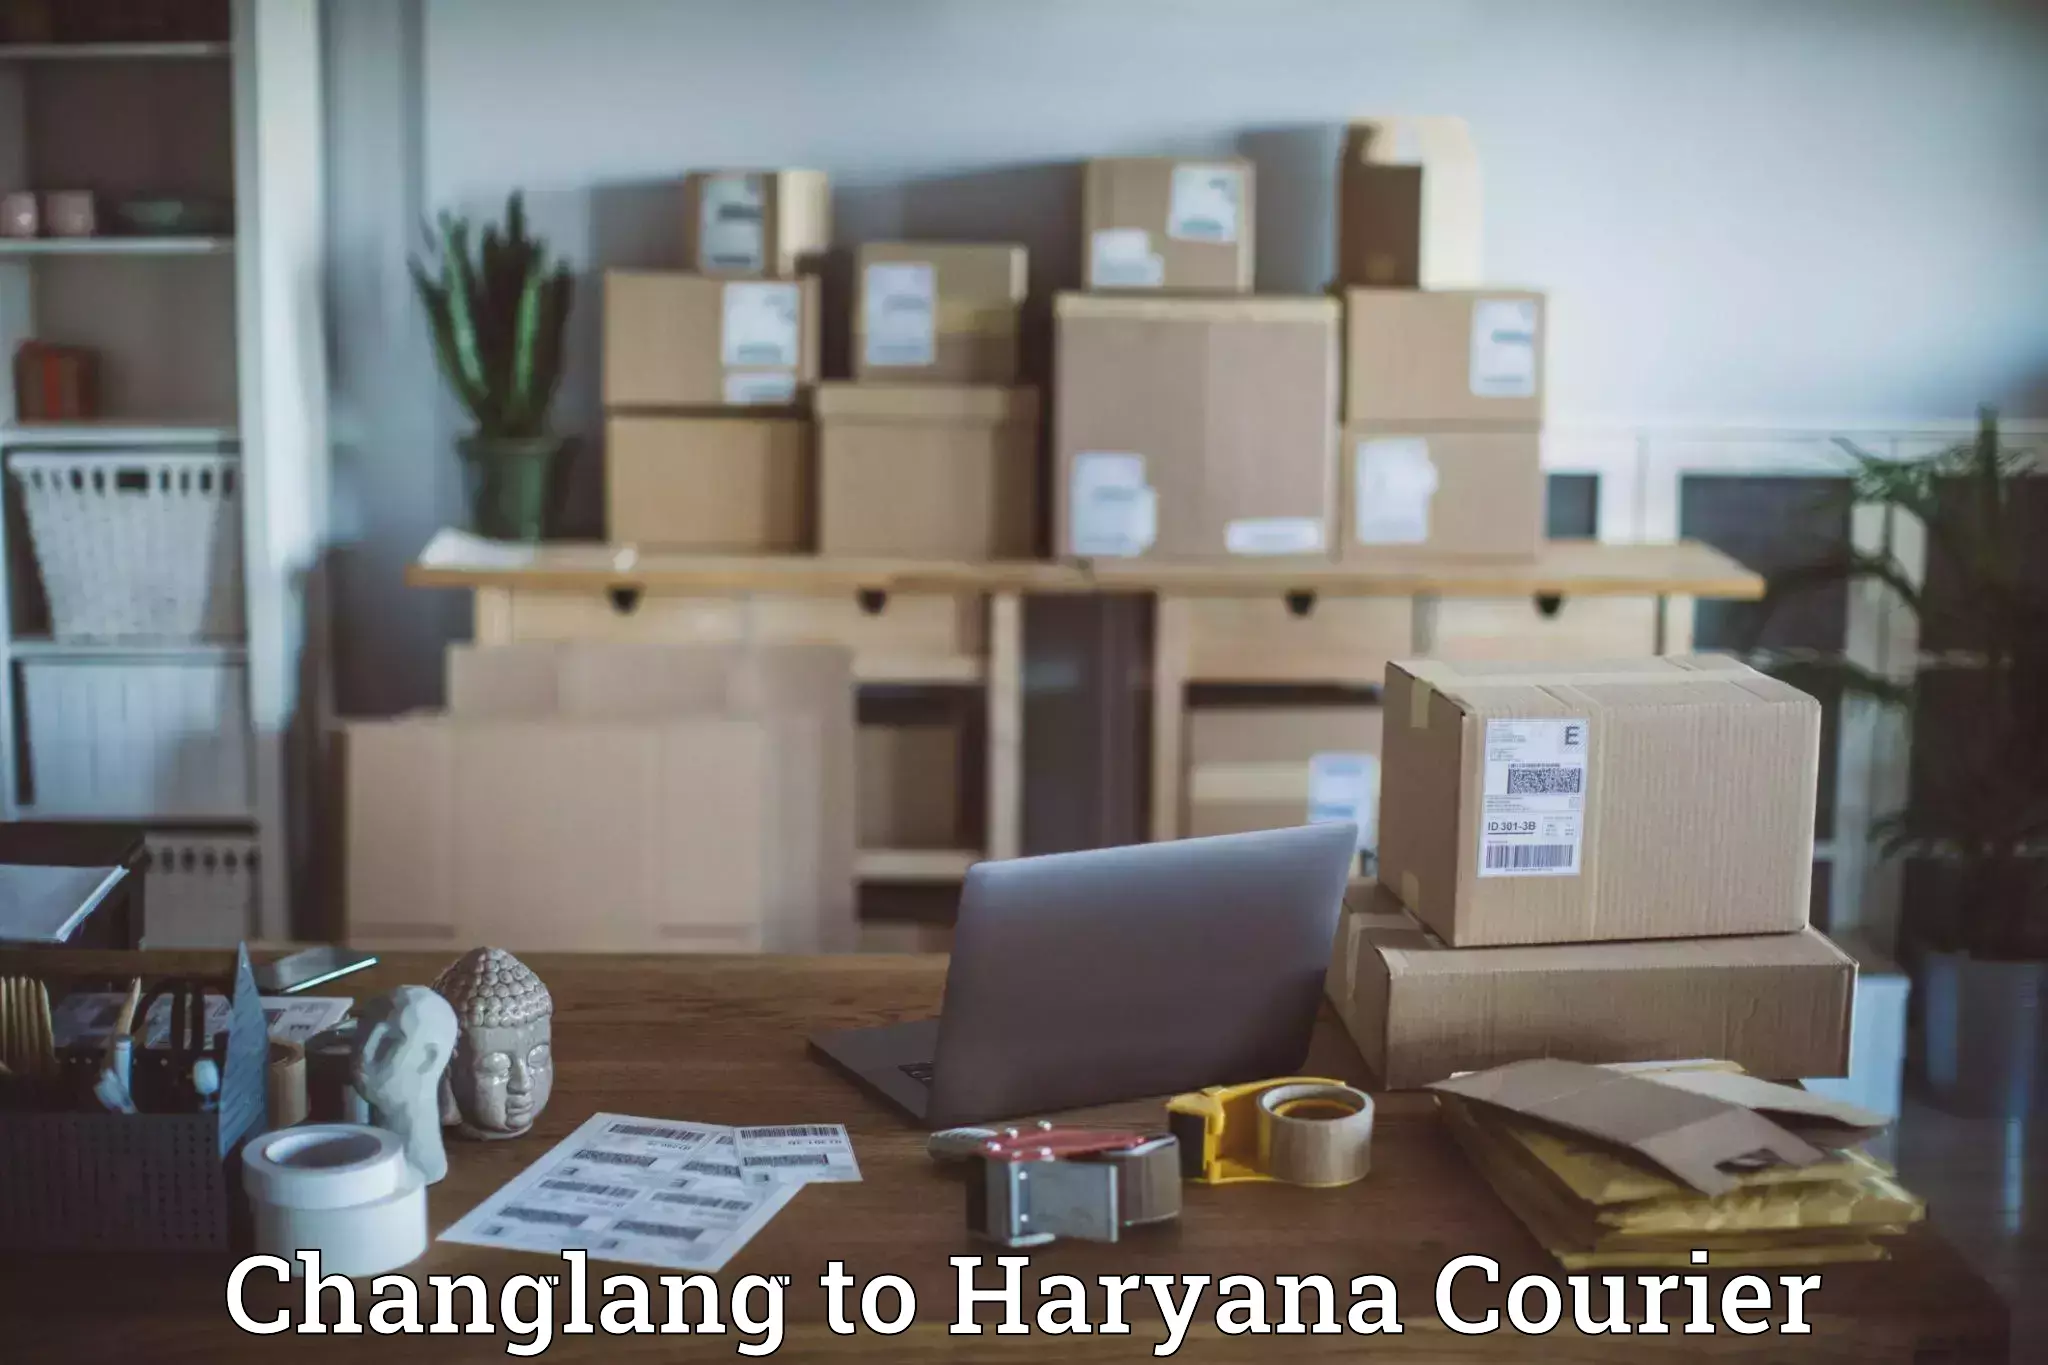 Speedy delivery service Changlang to Haryana